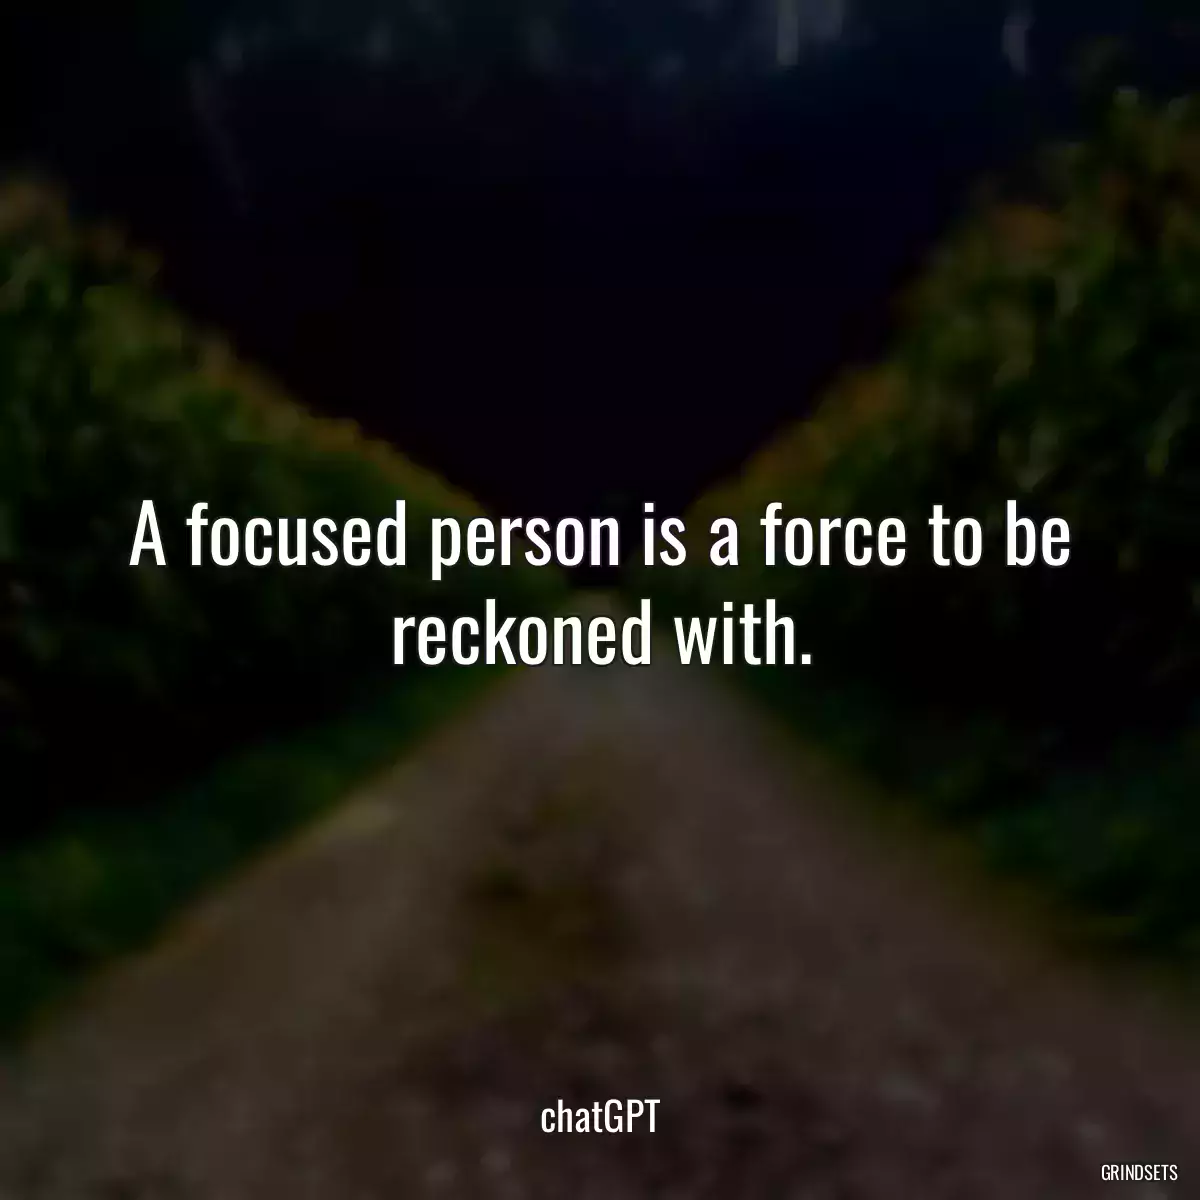 A focused person is a force to be reckoned with.